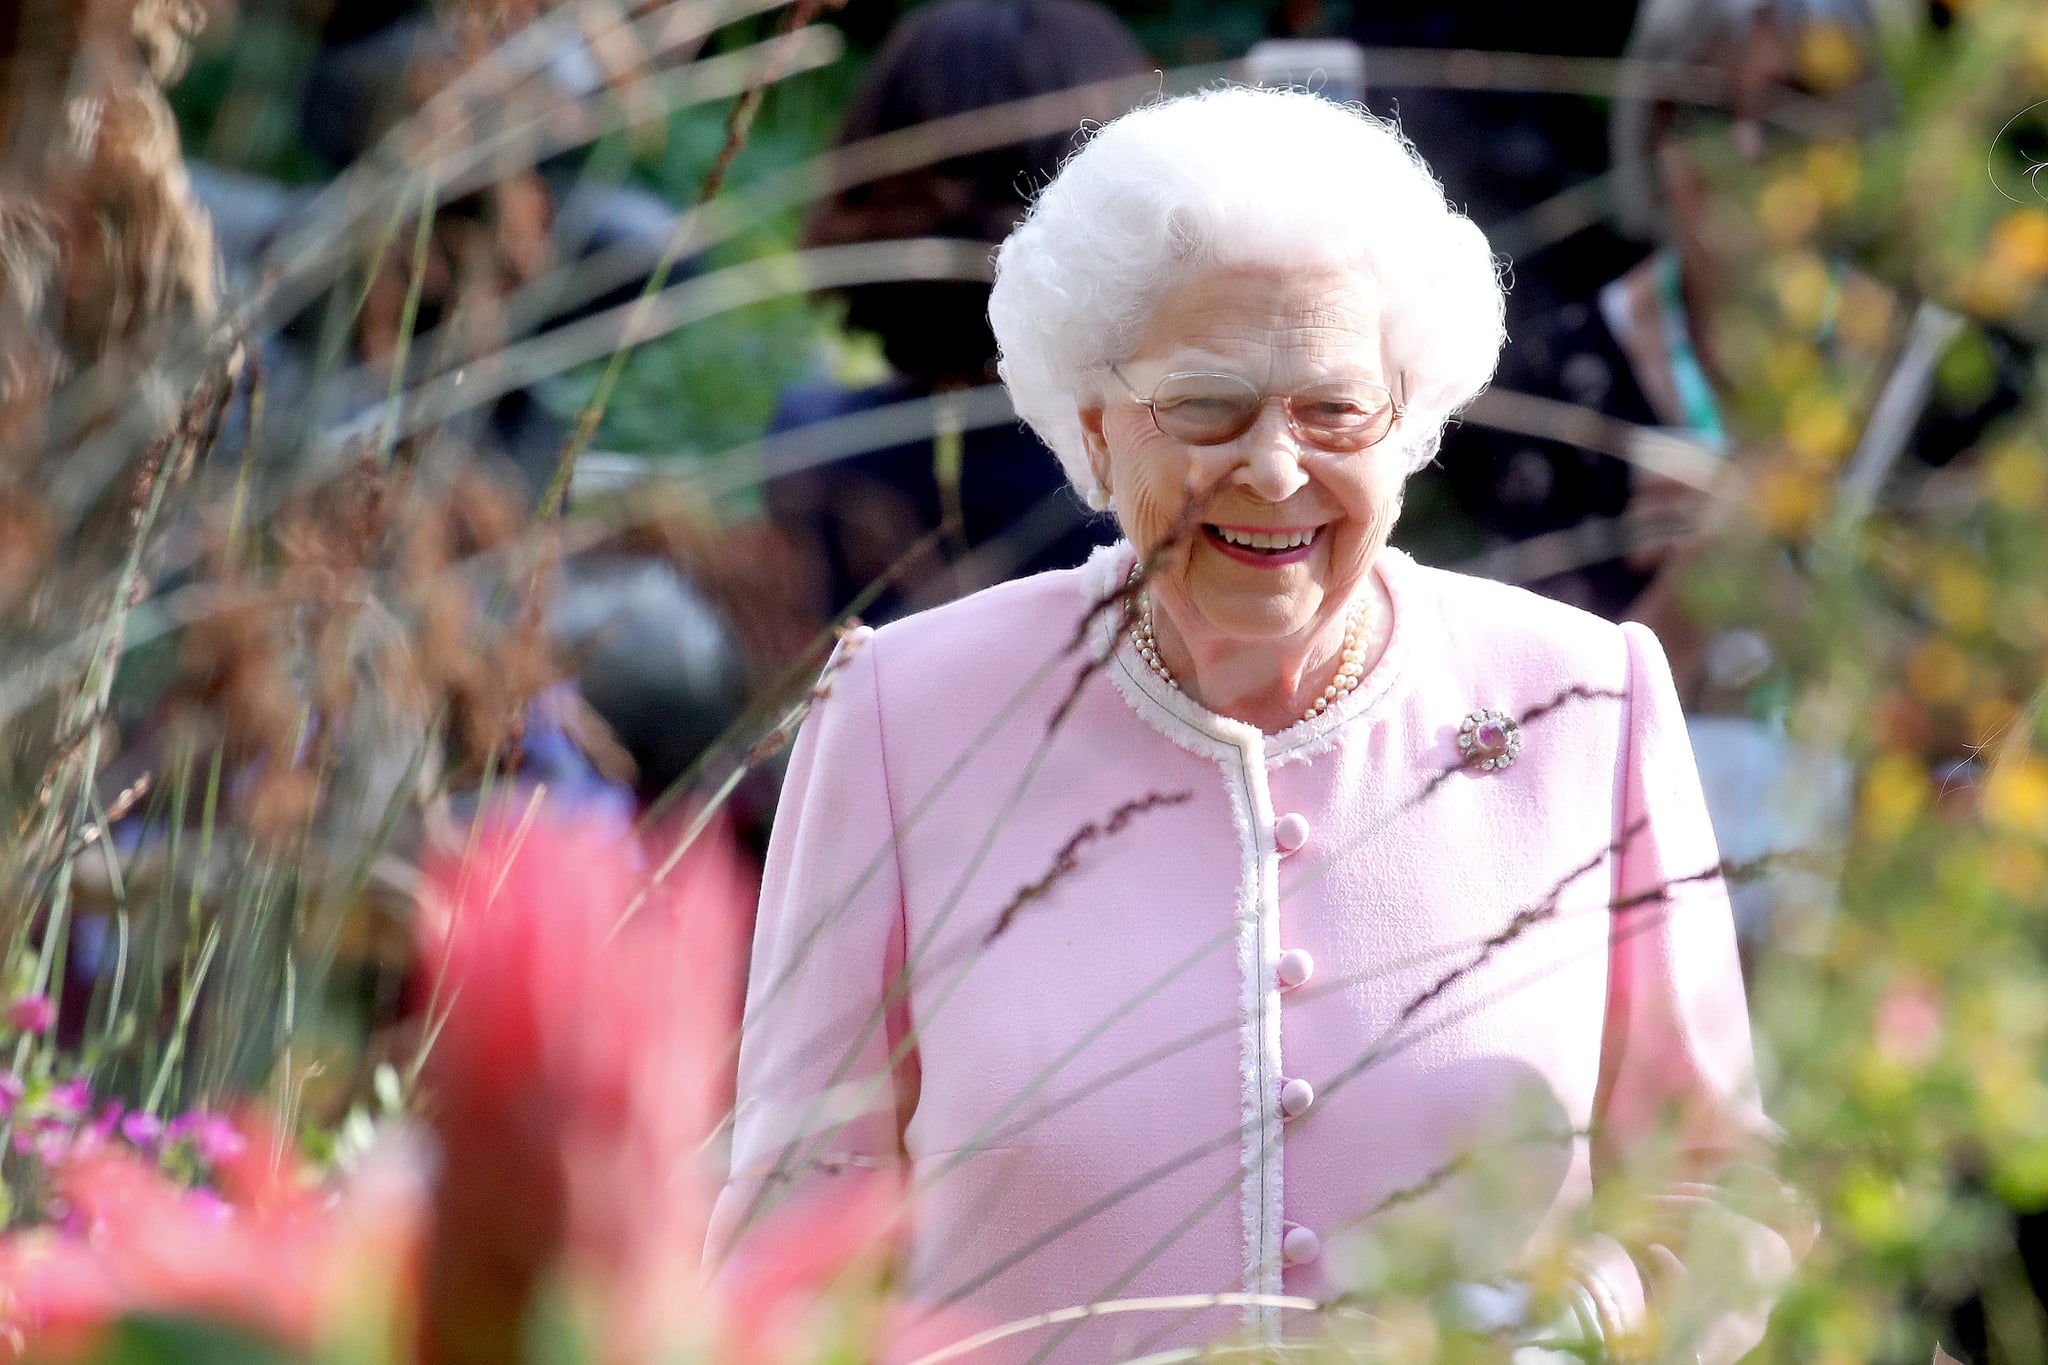 See Queen Elizabeth's Bright Pink Ensemble at Chelsea Flower Show